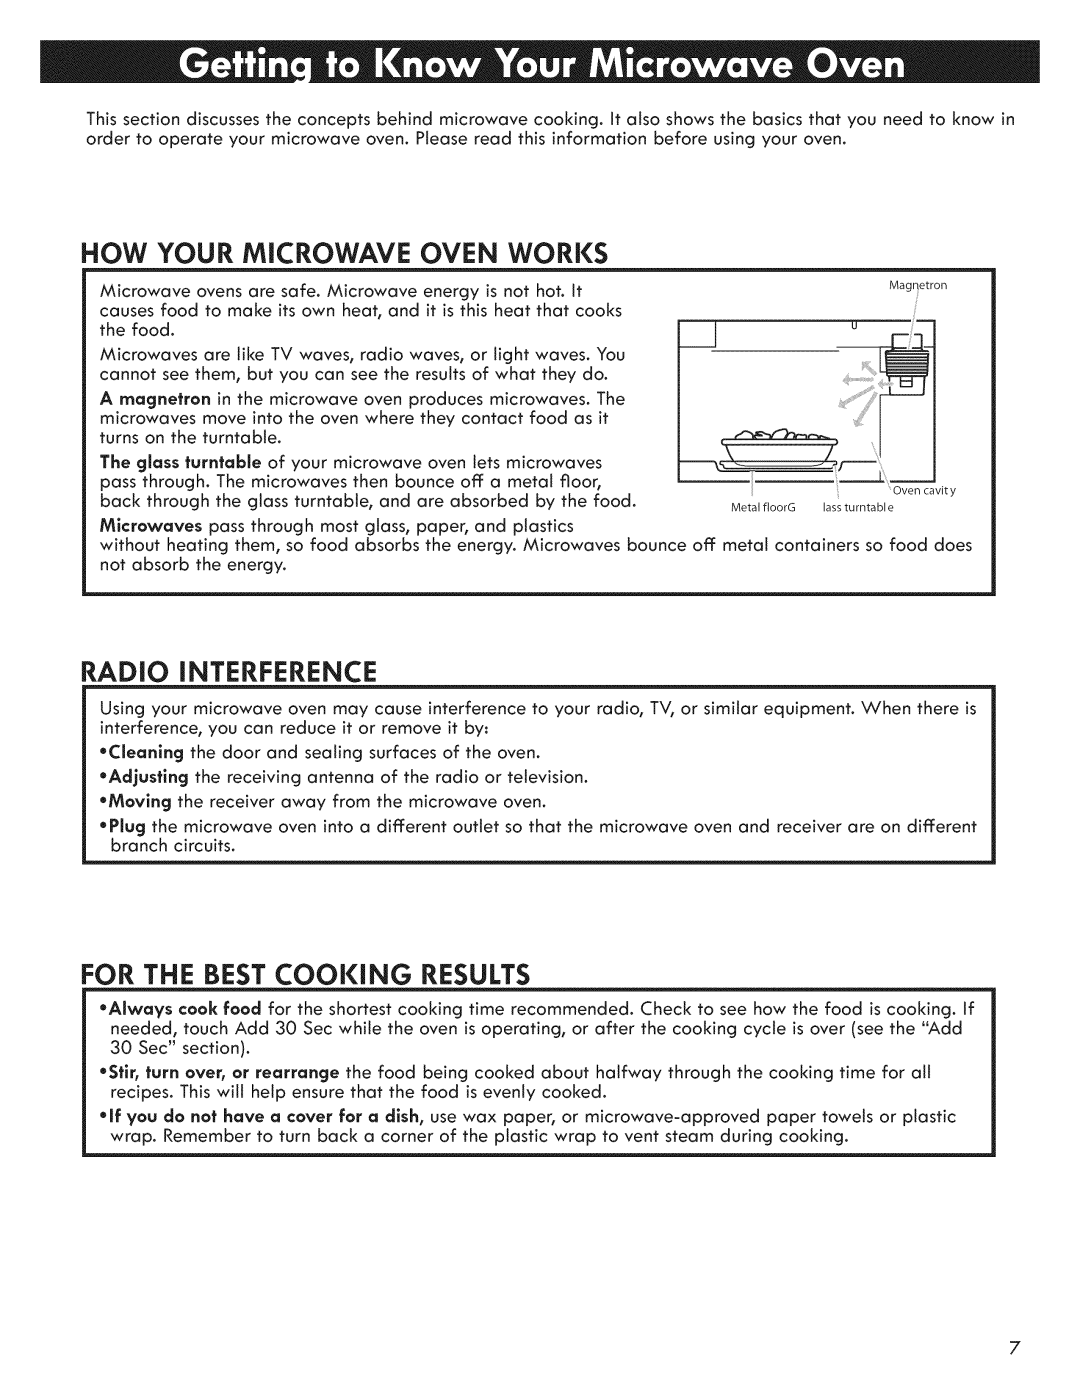 Kenmore 721.7915 manual How Your Microwave Oven Works, Radio Interference, For The Best Cooking Results 